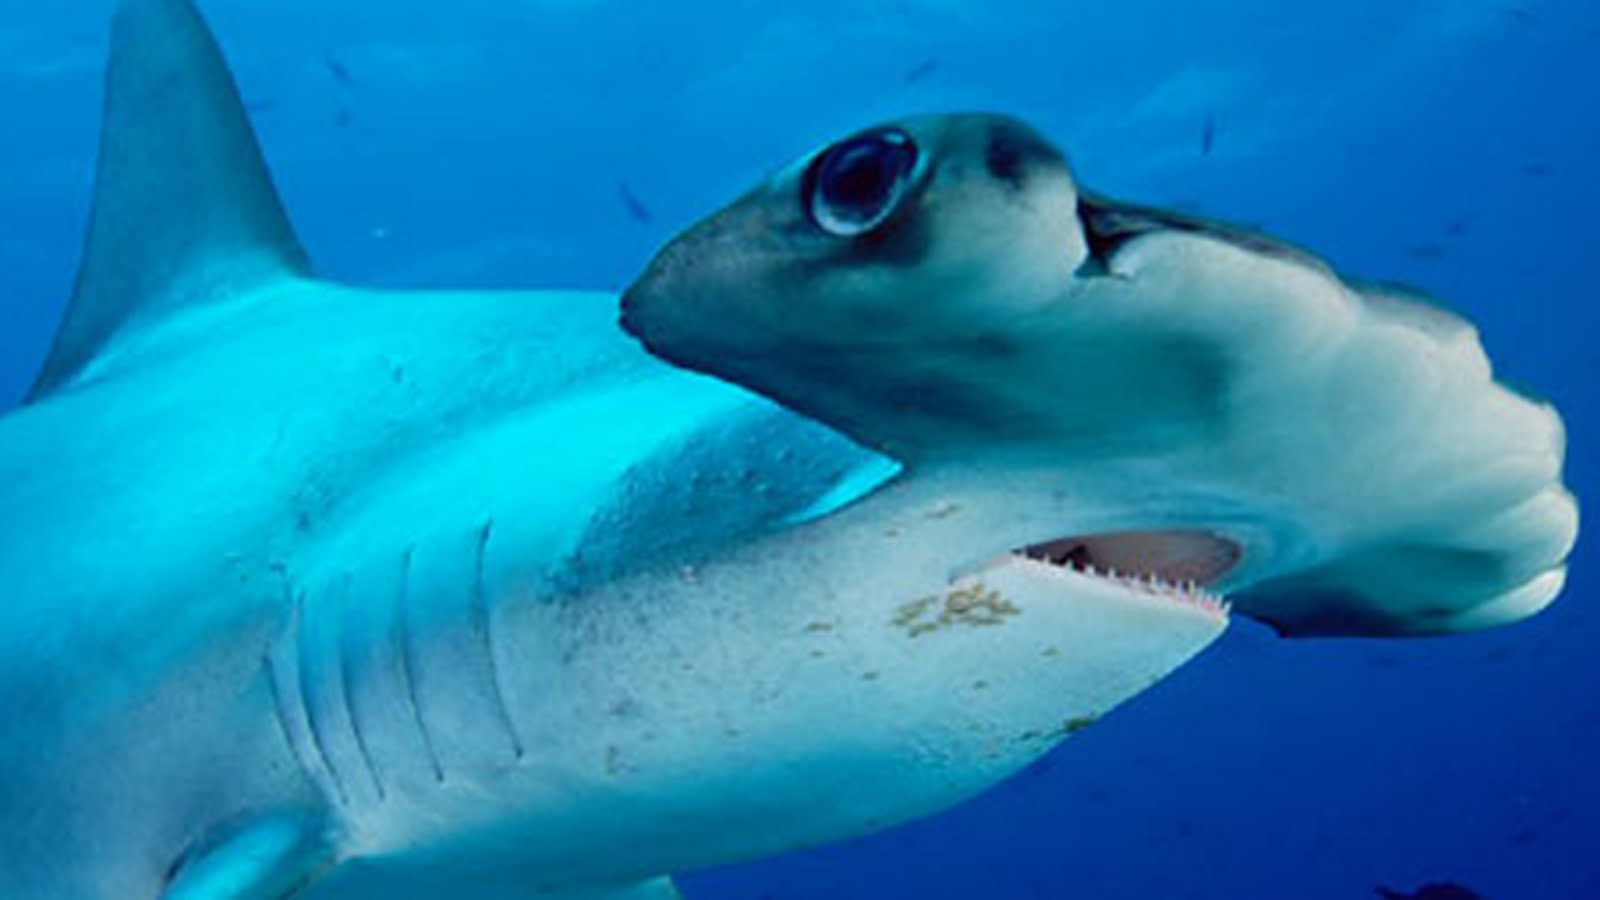 real scary shark pictures 24240 hd wallpapersjpg